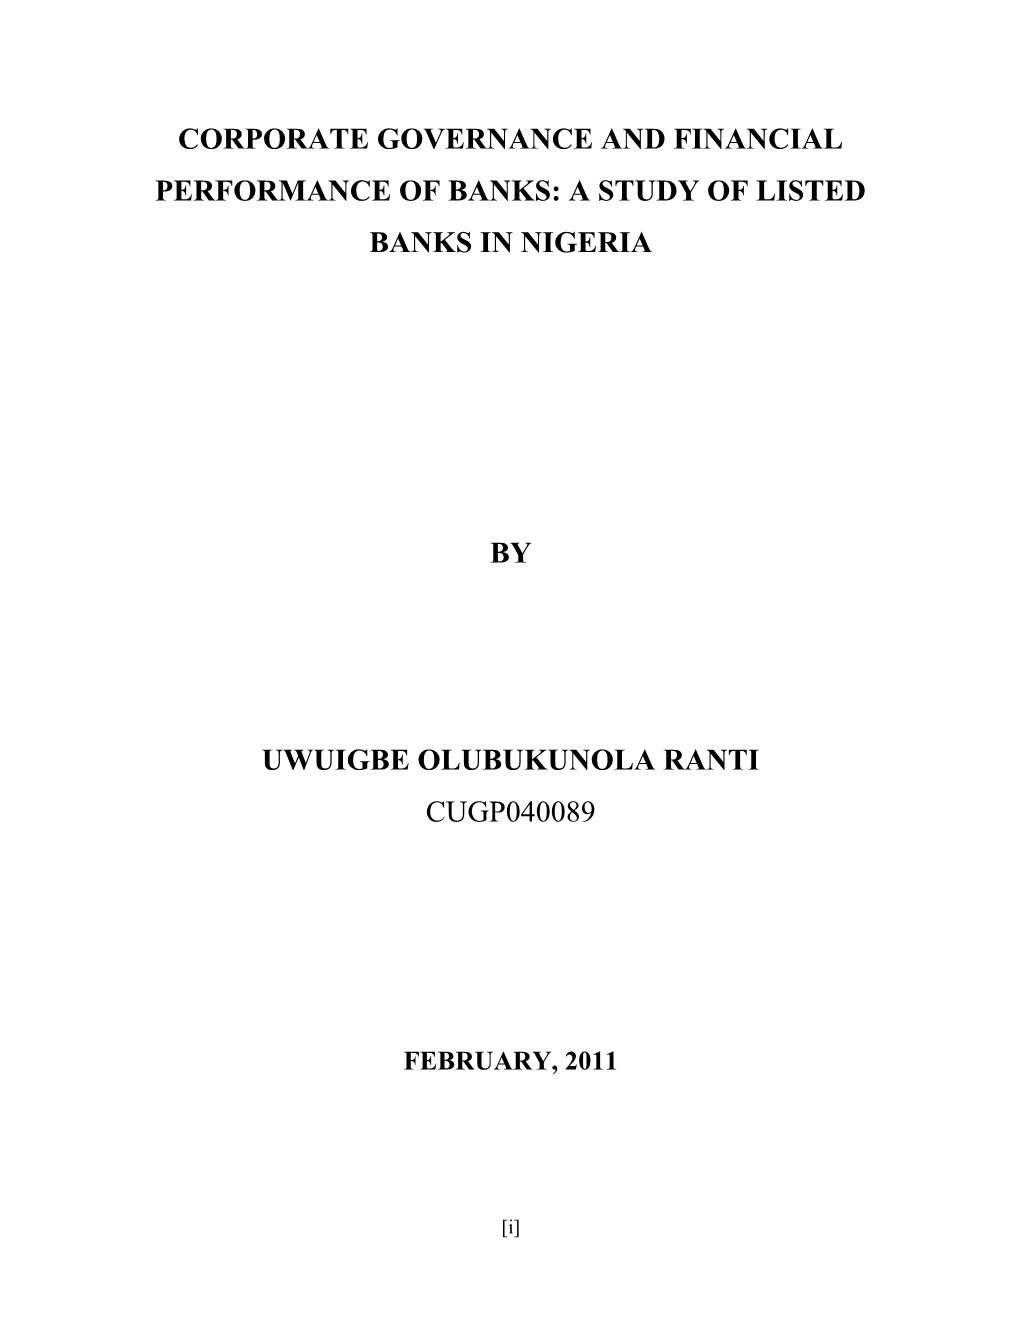 Corporate Governance and Financial Performance of Banks: a Study of Listed Banks in Nigeria